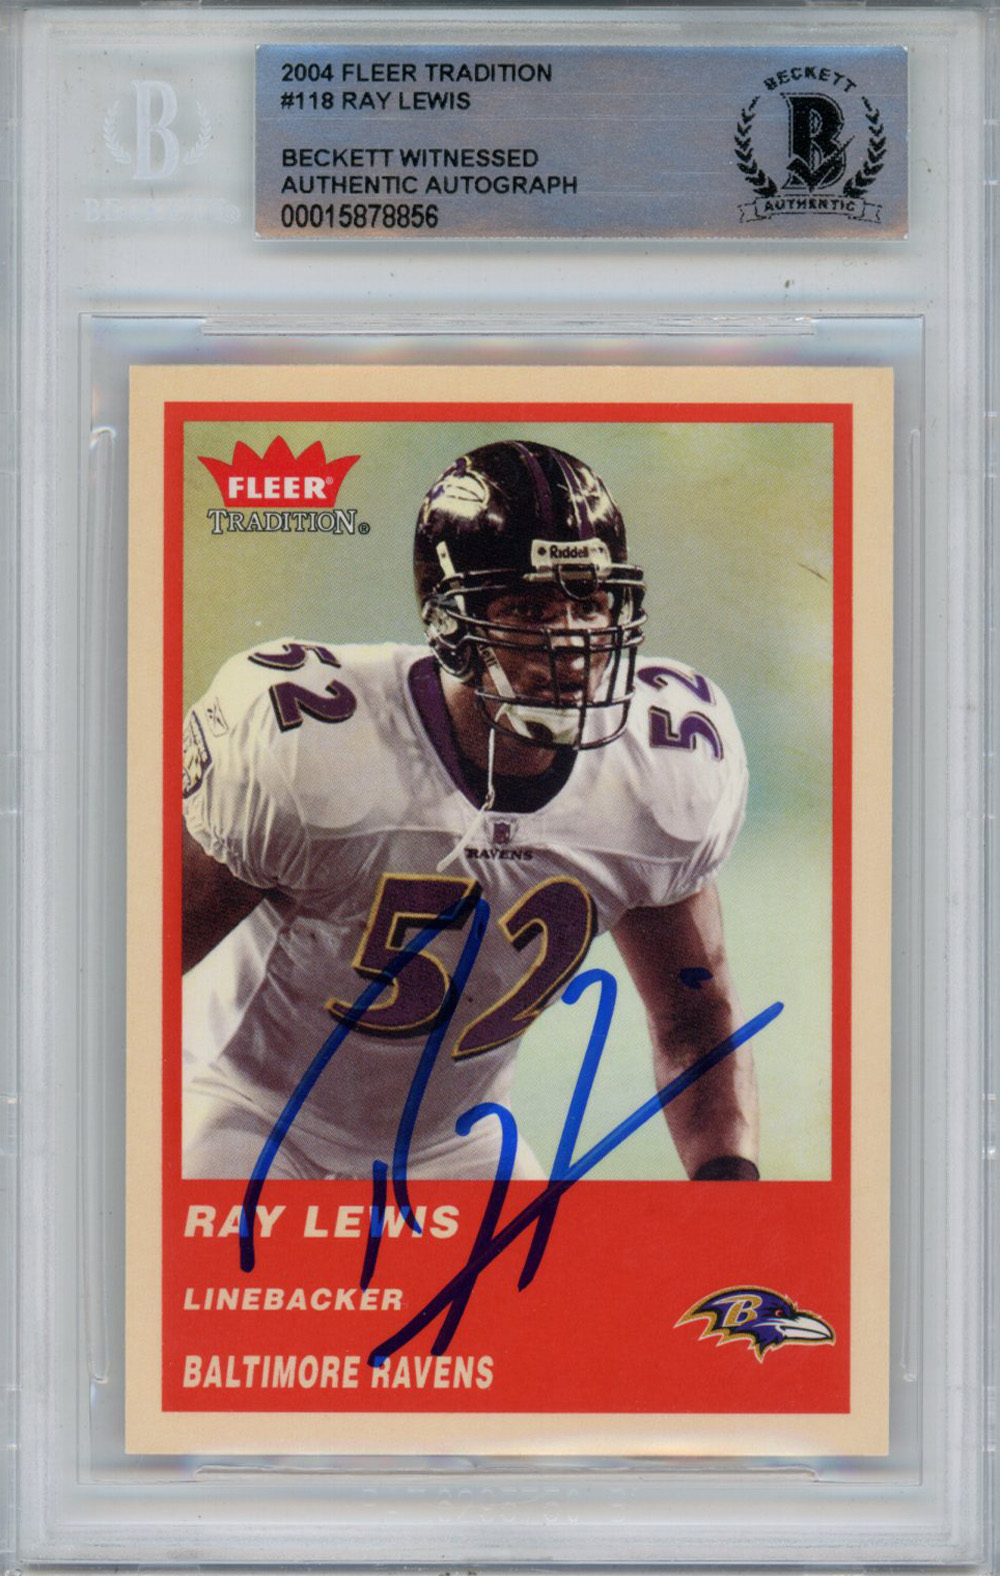 Ray Lewis Autographed 2004 Fleer Tradition #118 Trading Card Beckett Slab